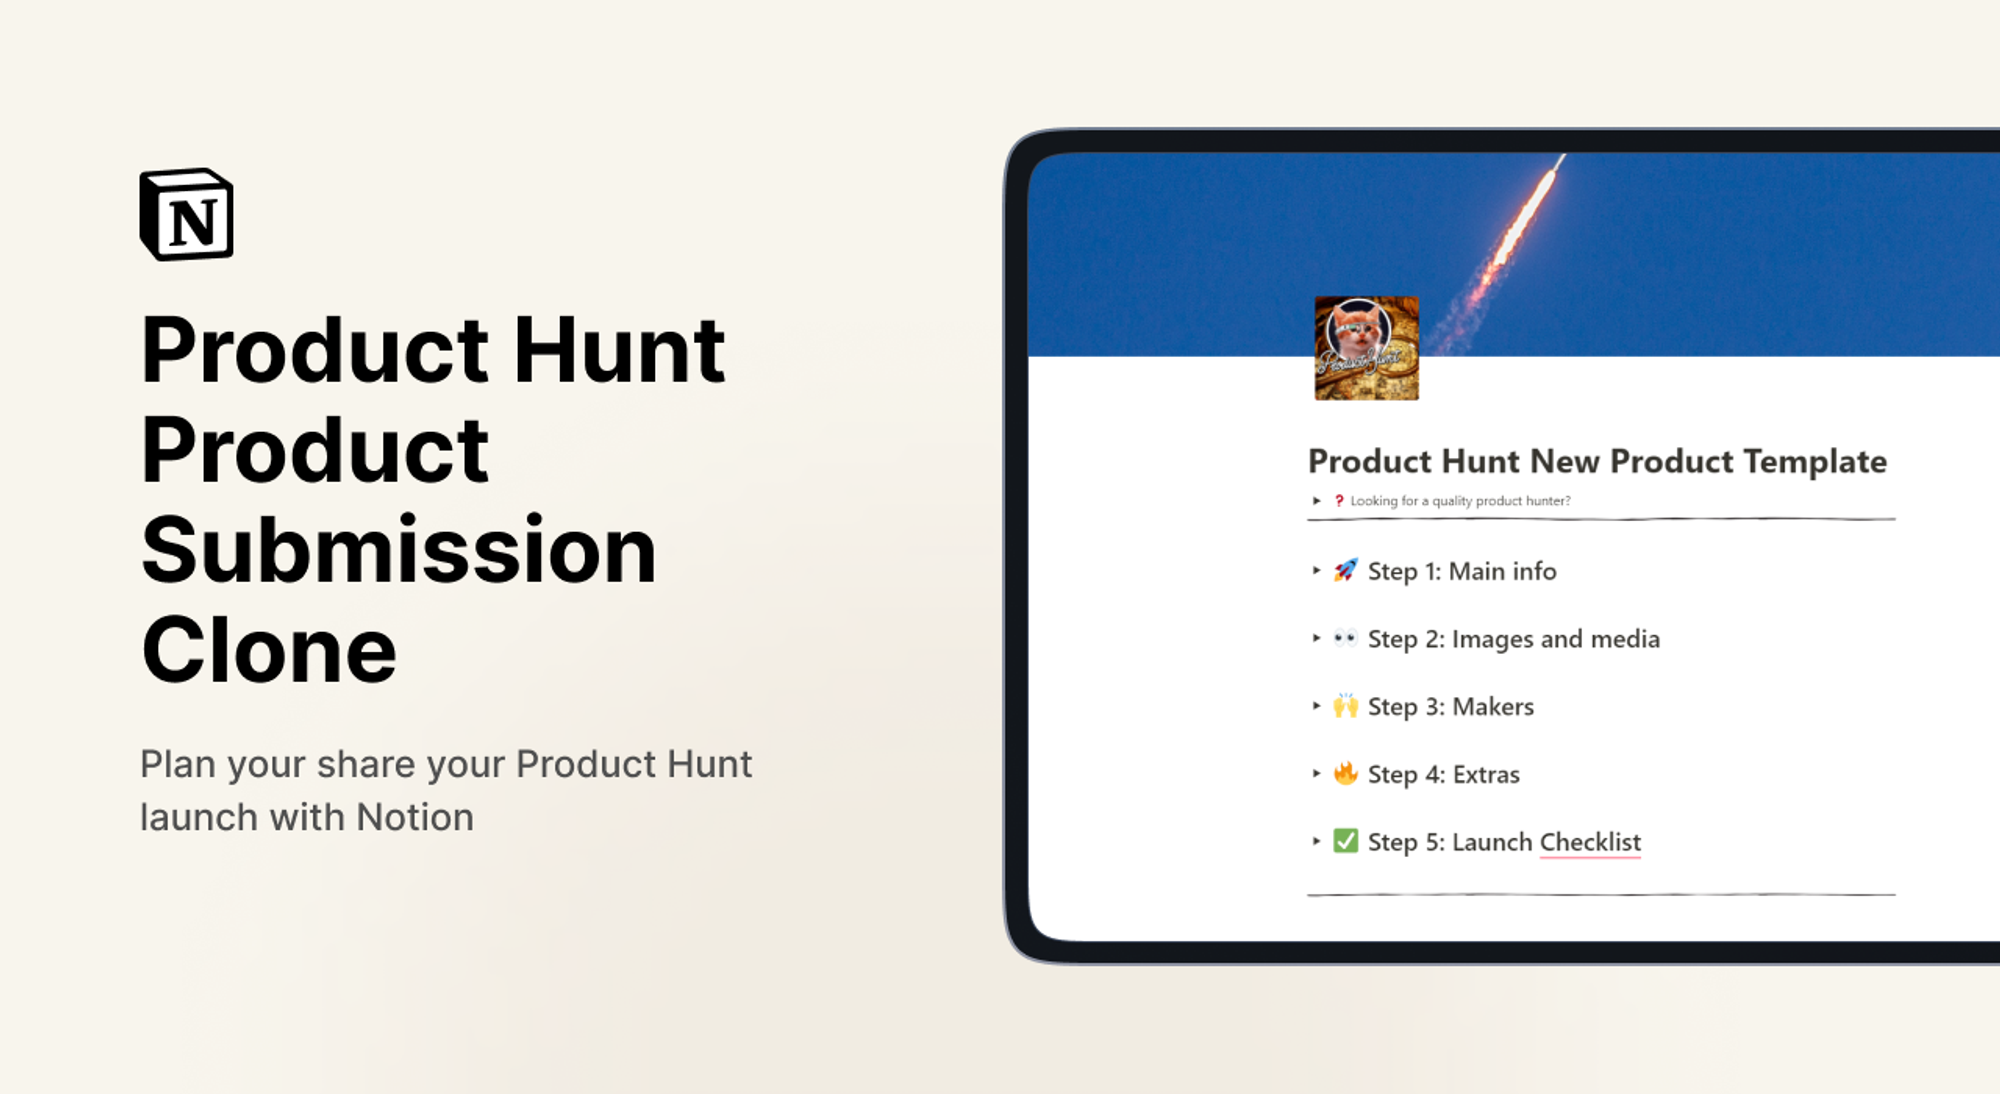 Product Hunt Product - Cover.png